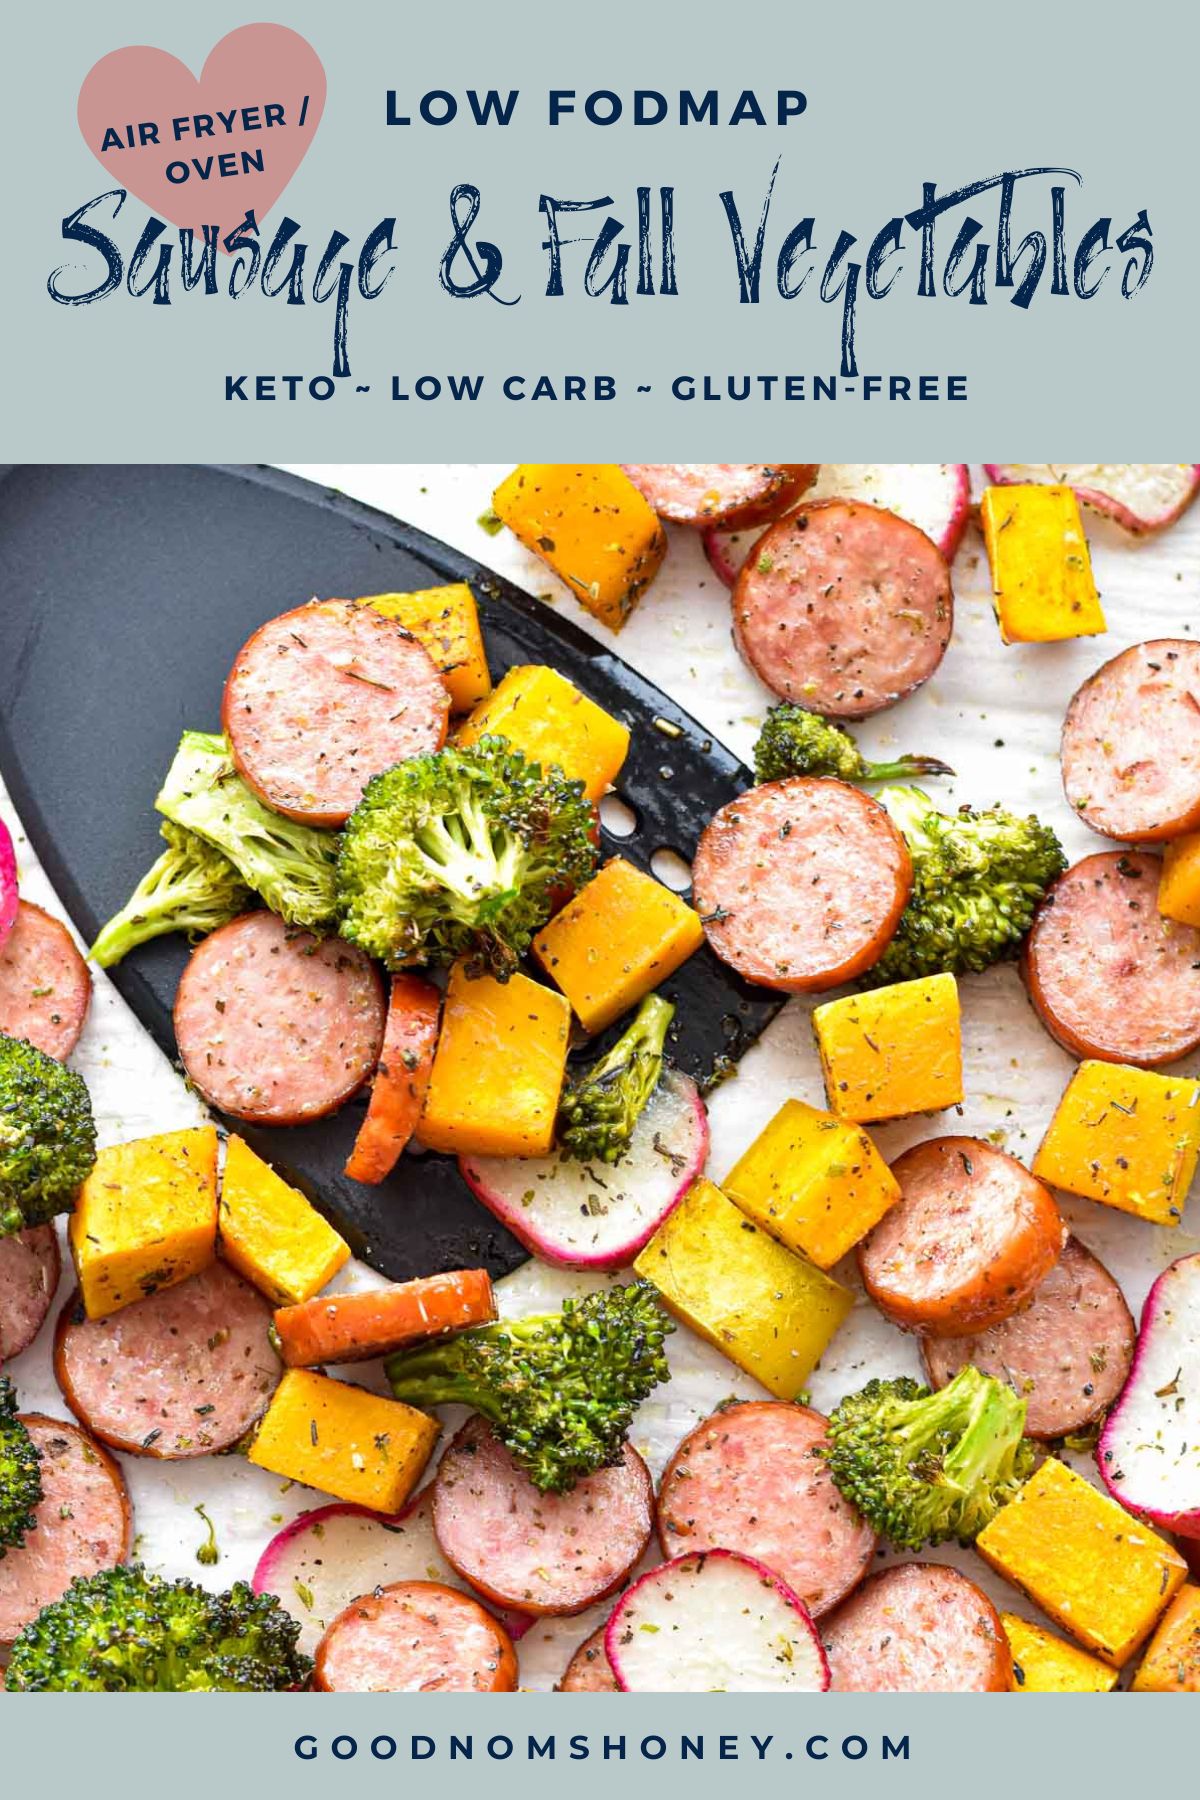 pinterest image with low fodmap air fryer / oven sausage and fall vegetables keto low carb gluten-free at the top and goodnomshoney.com at the bottom